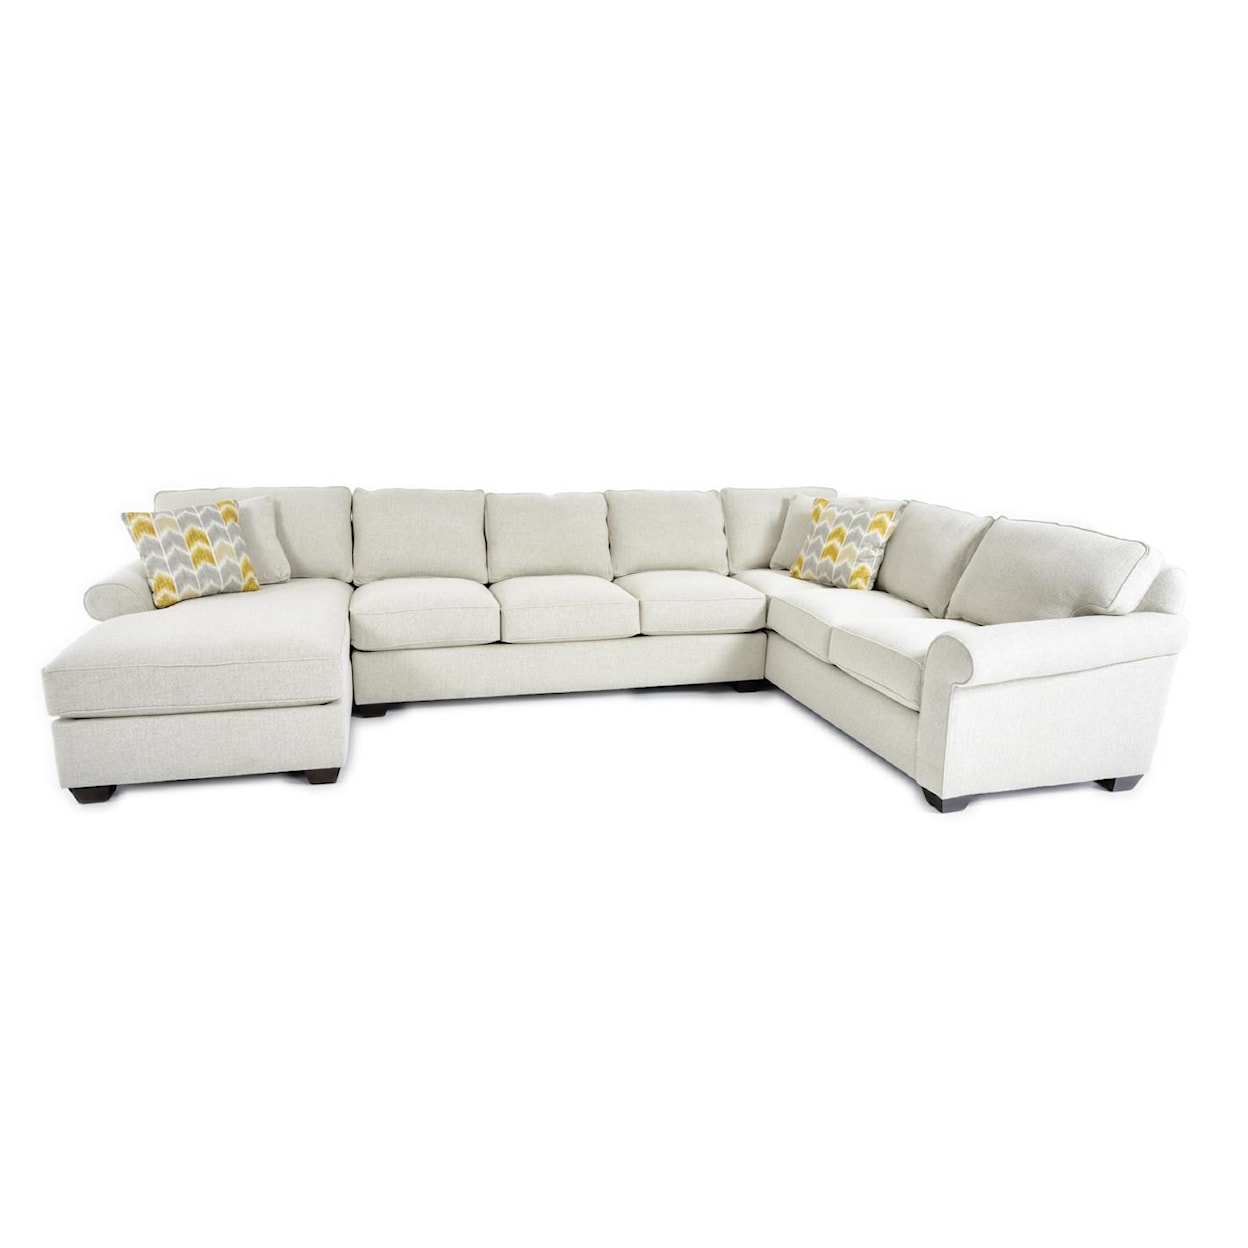 Precedent Multiple Choices 3 Pc Sectional Sofa